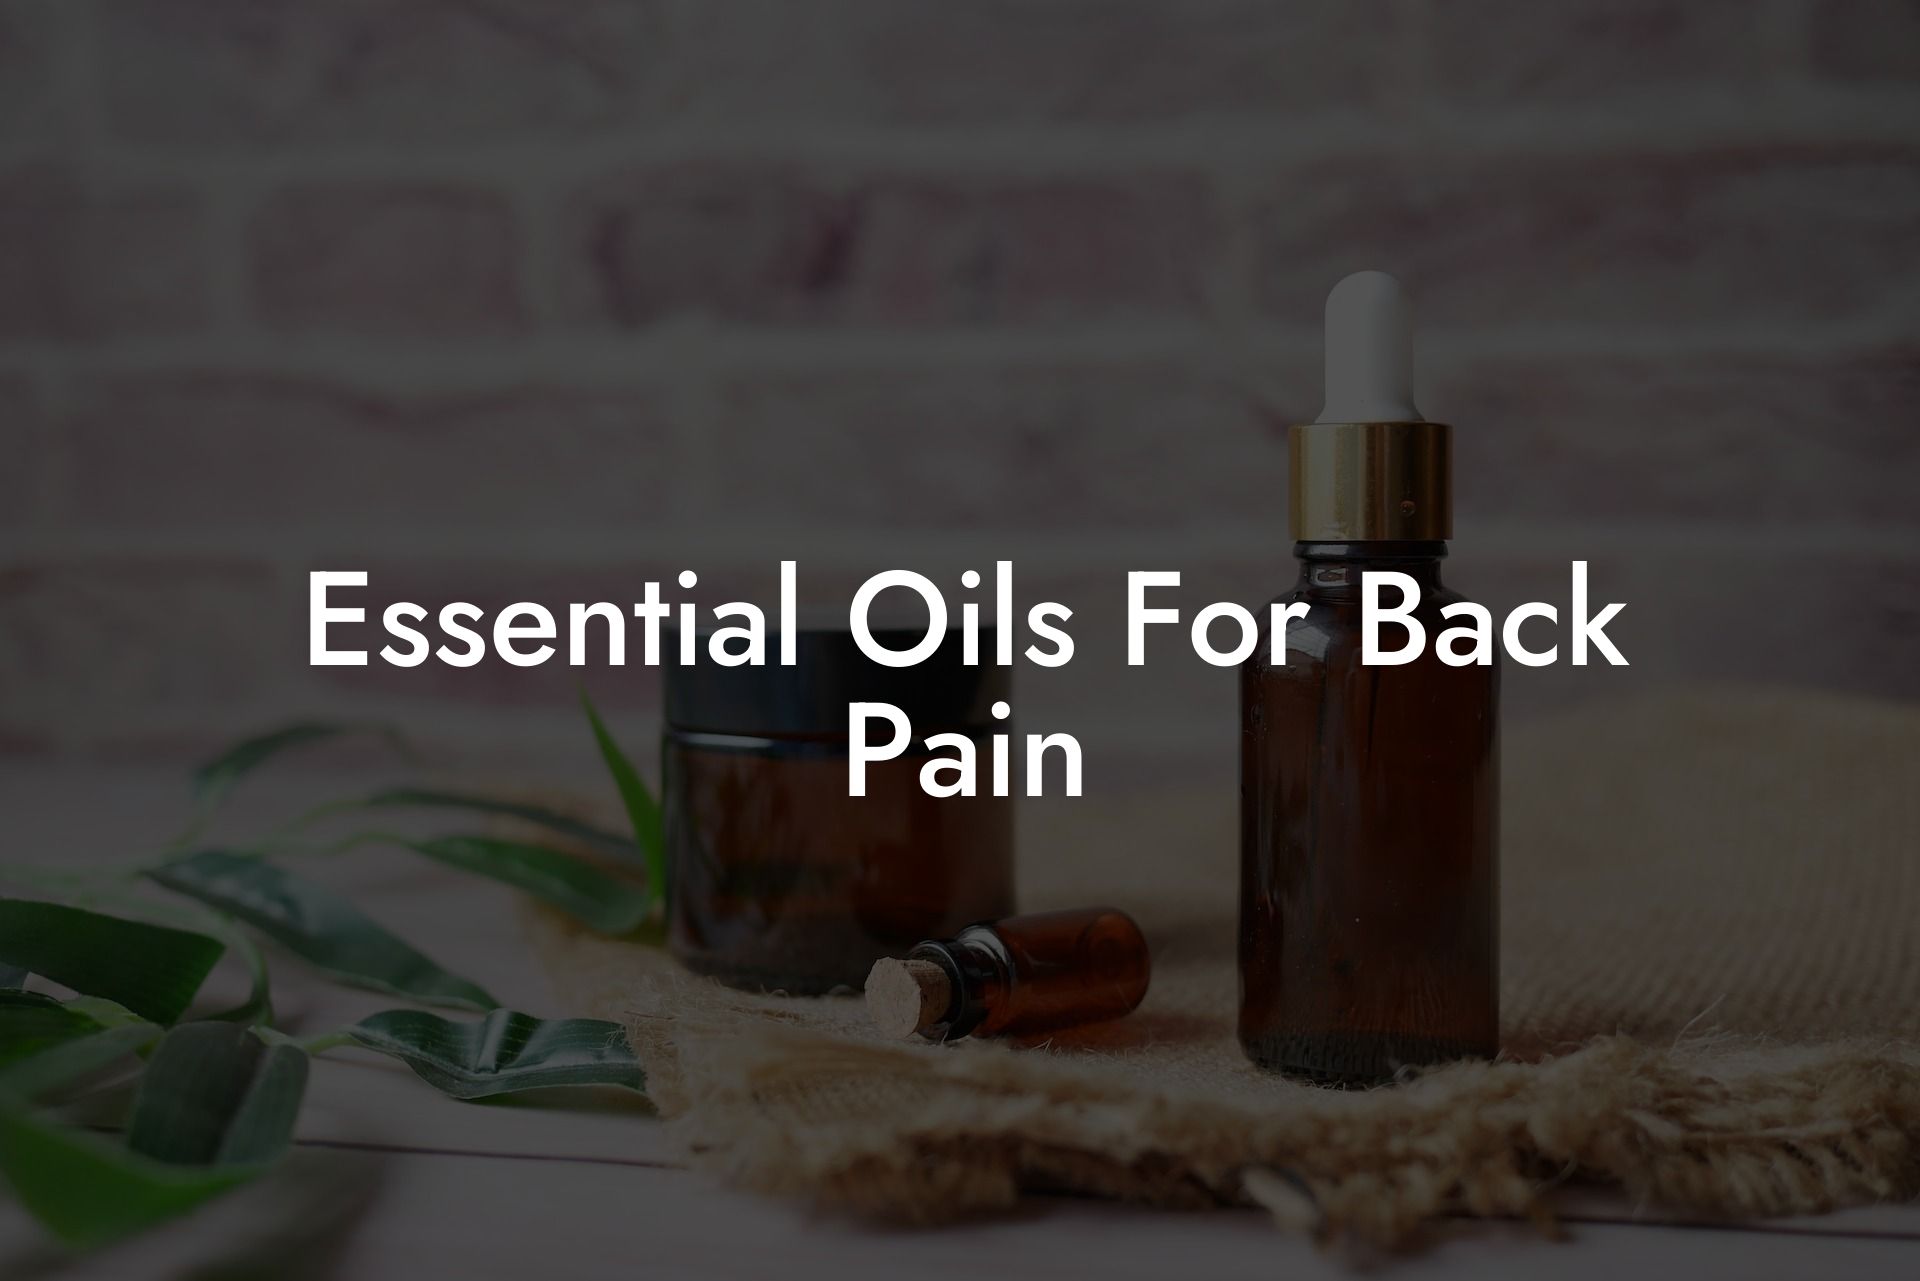 Essential Oils For Back Pain